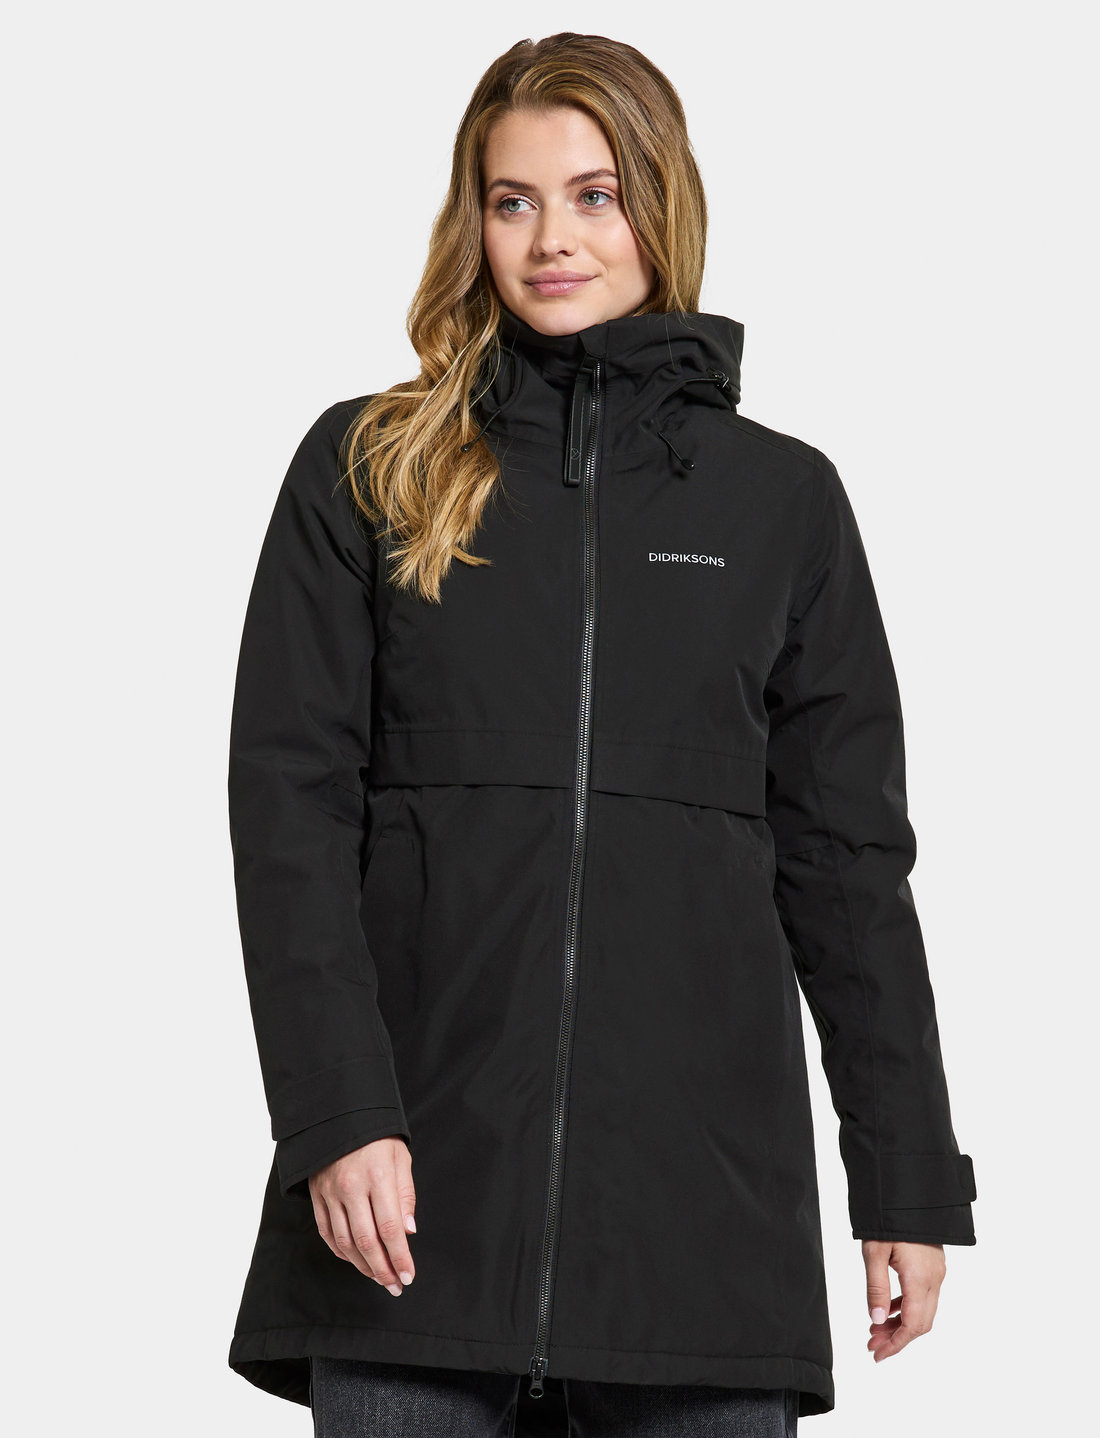 Didriksons Helle Wns Parka 5 - 110 €. Buy Parka Coats from Didriksons  online at Boozt.com. Fast delivery and easy returns